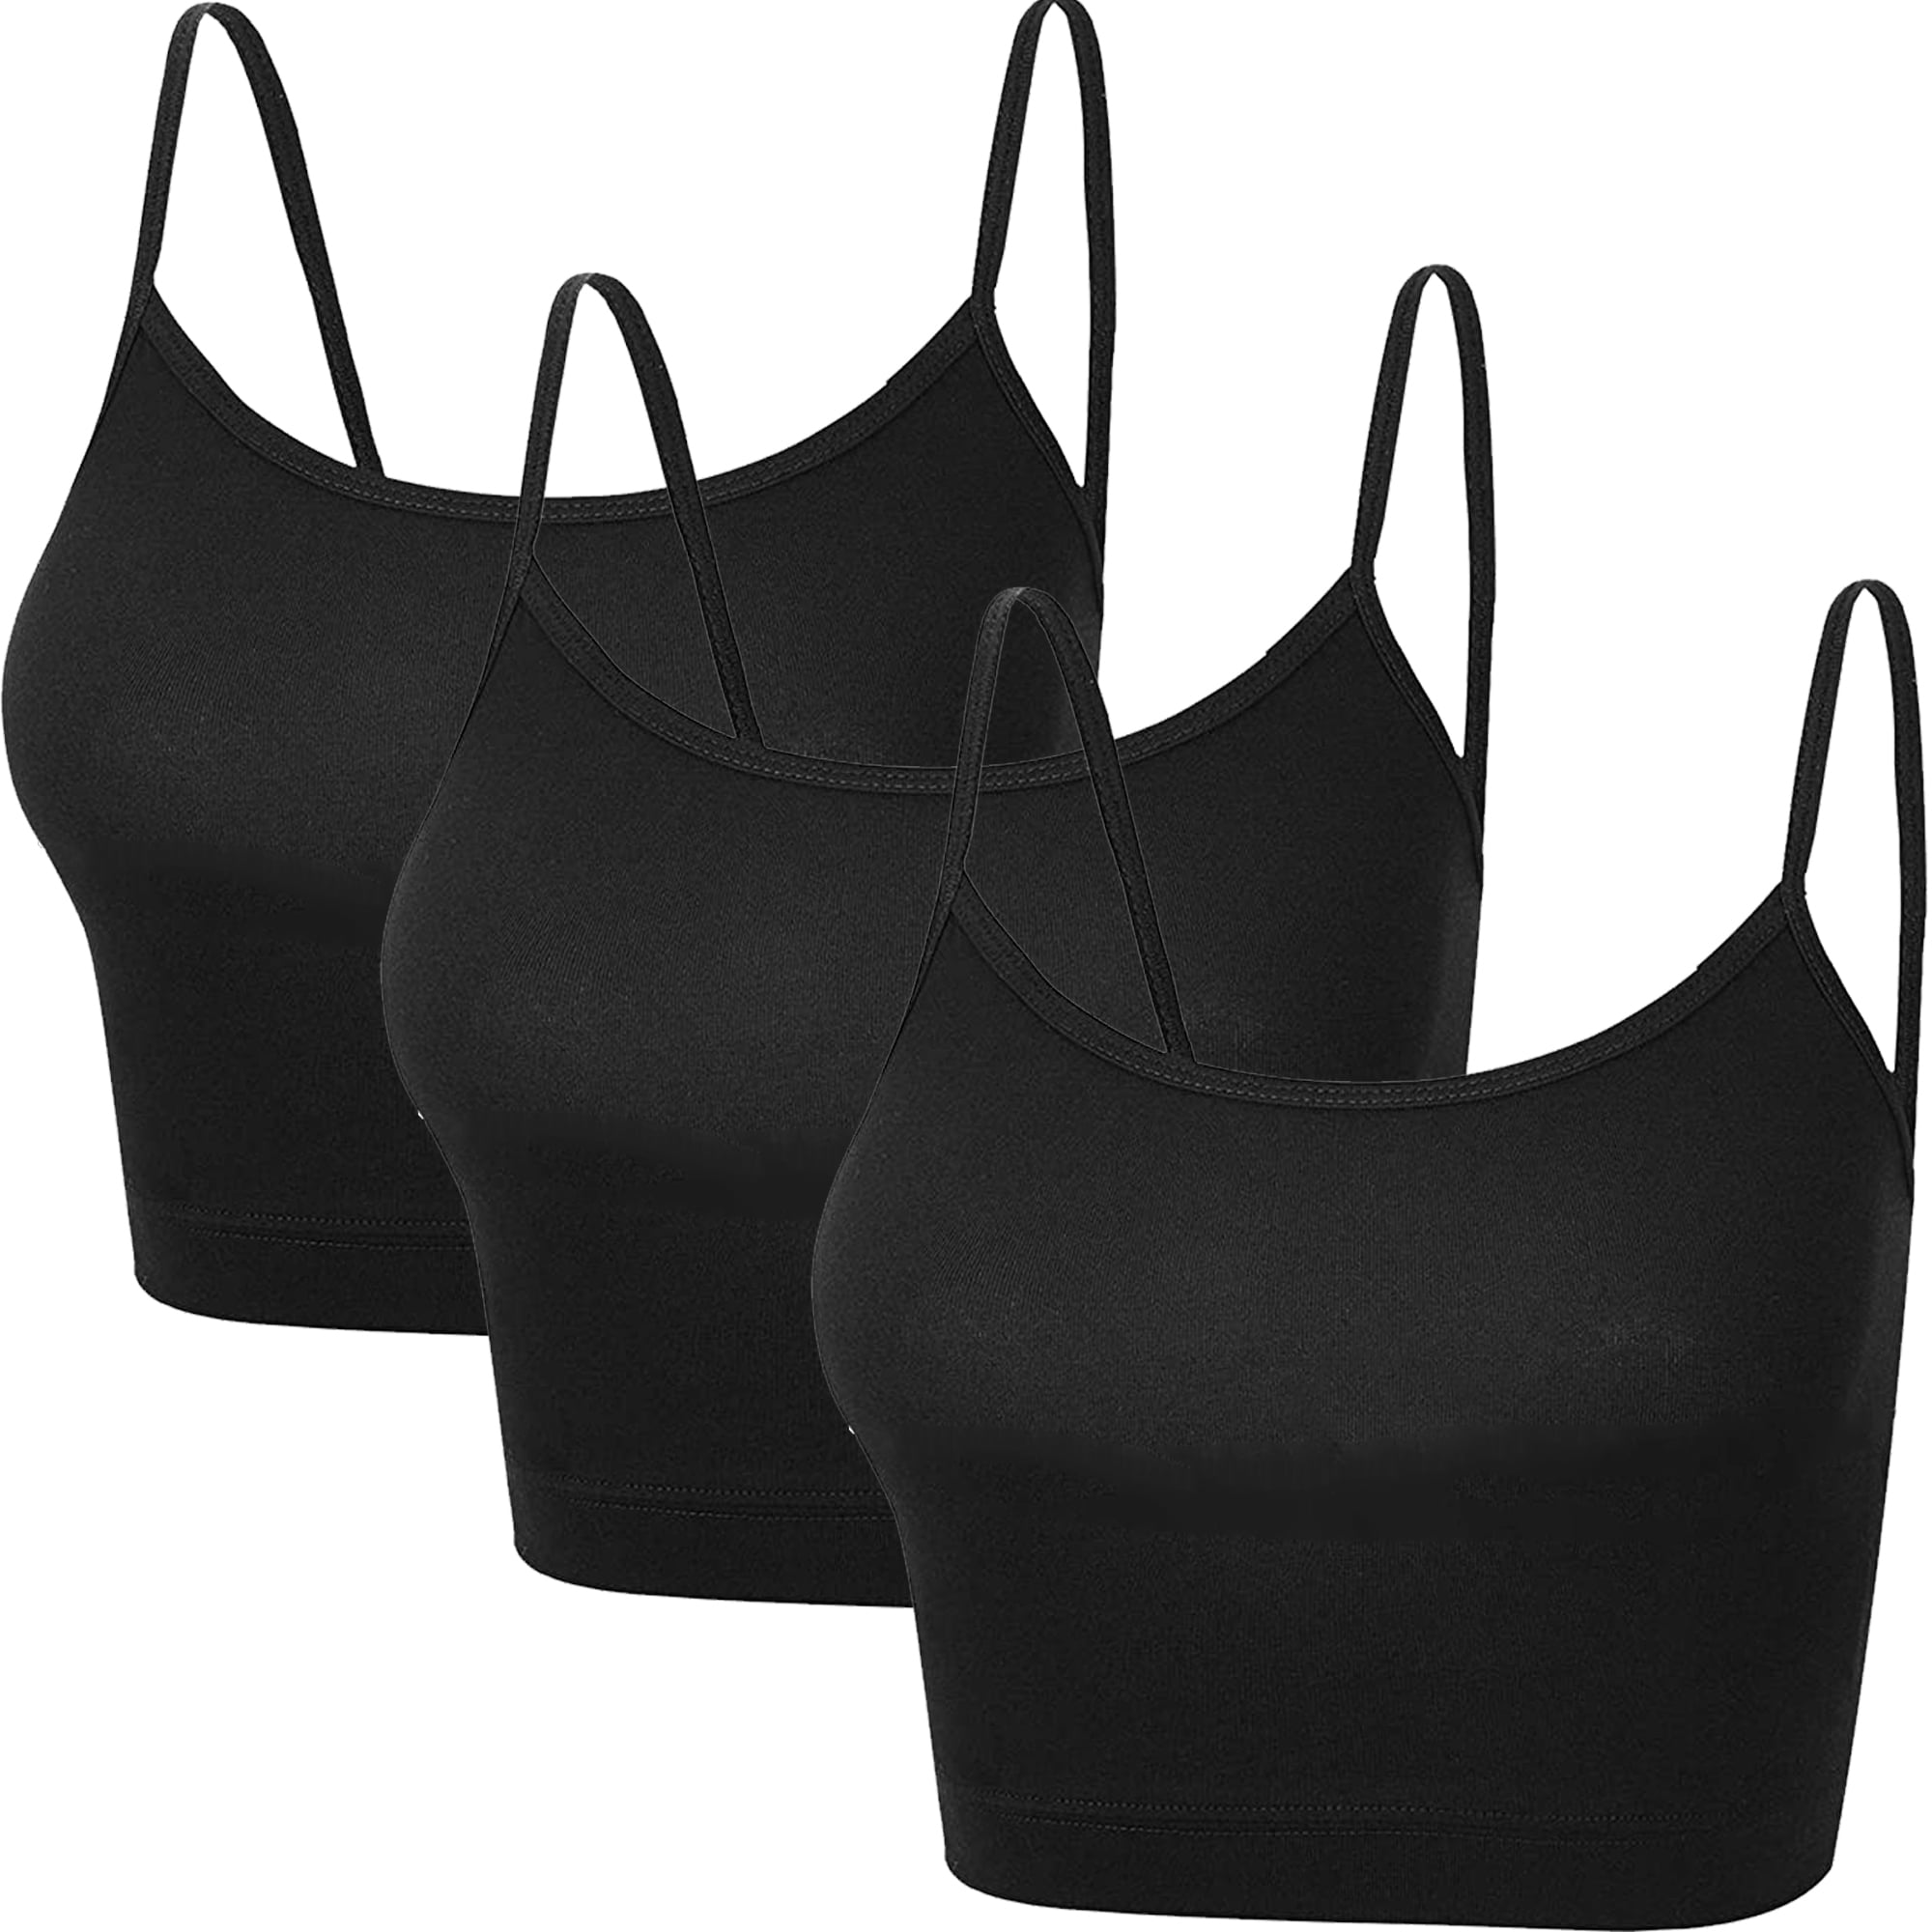 Elbourn Cross Back Sport Bras Padded Strappy Criss Cross Cropped Bras for  Yoga Workout Fitness Low Impact 6 Pack